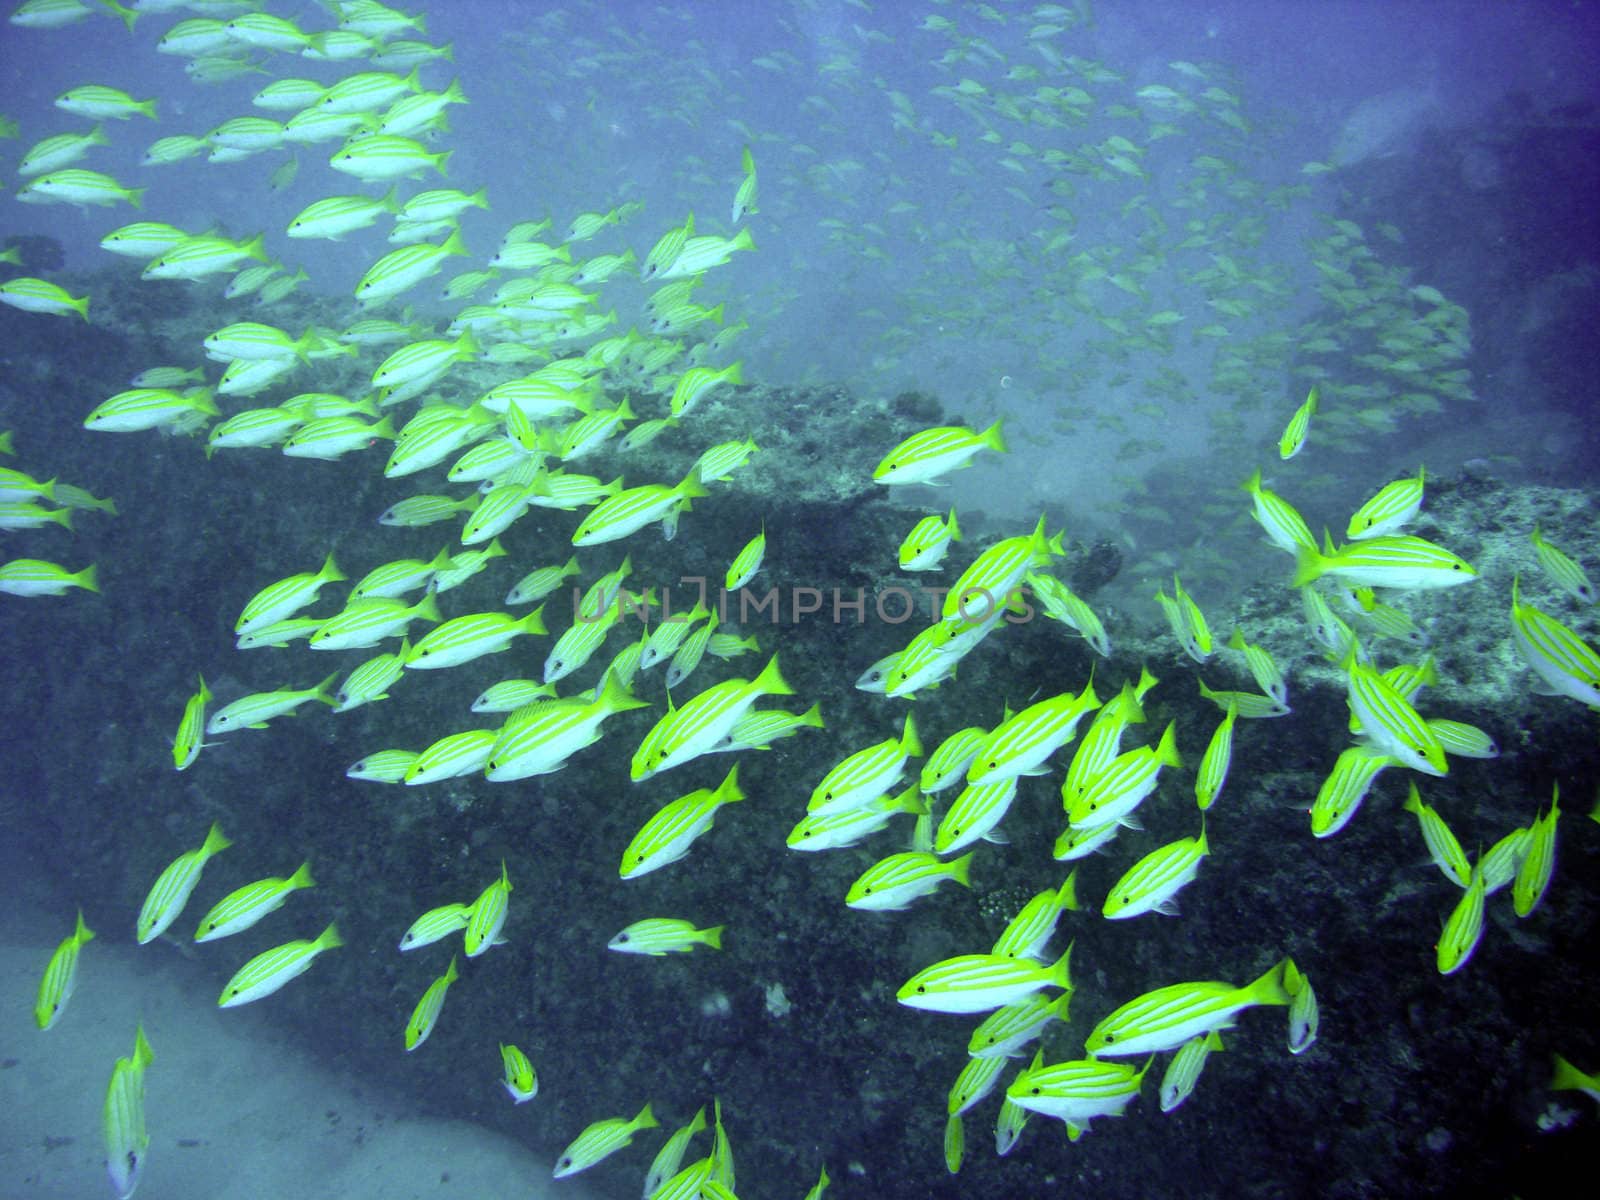 Blue banded snappers